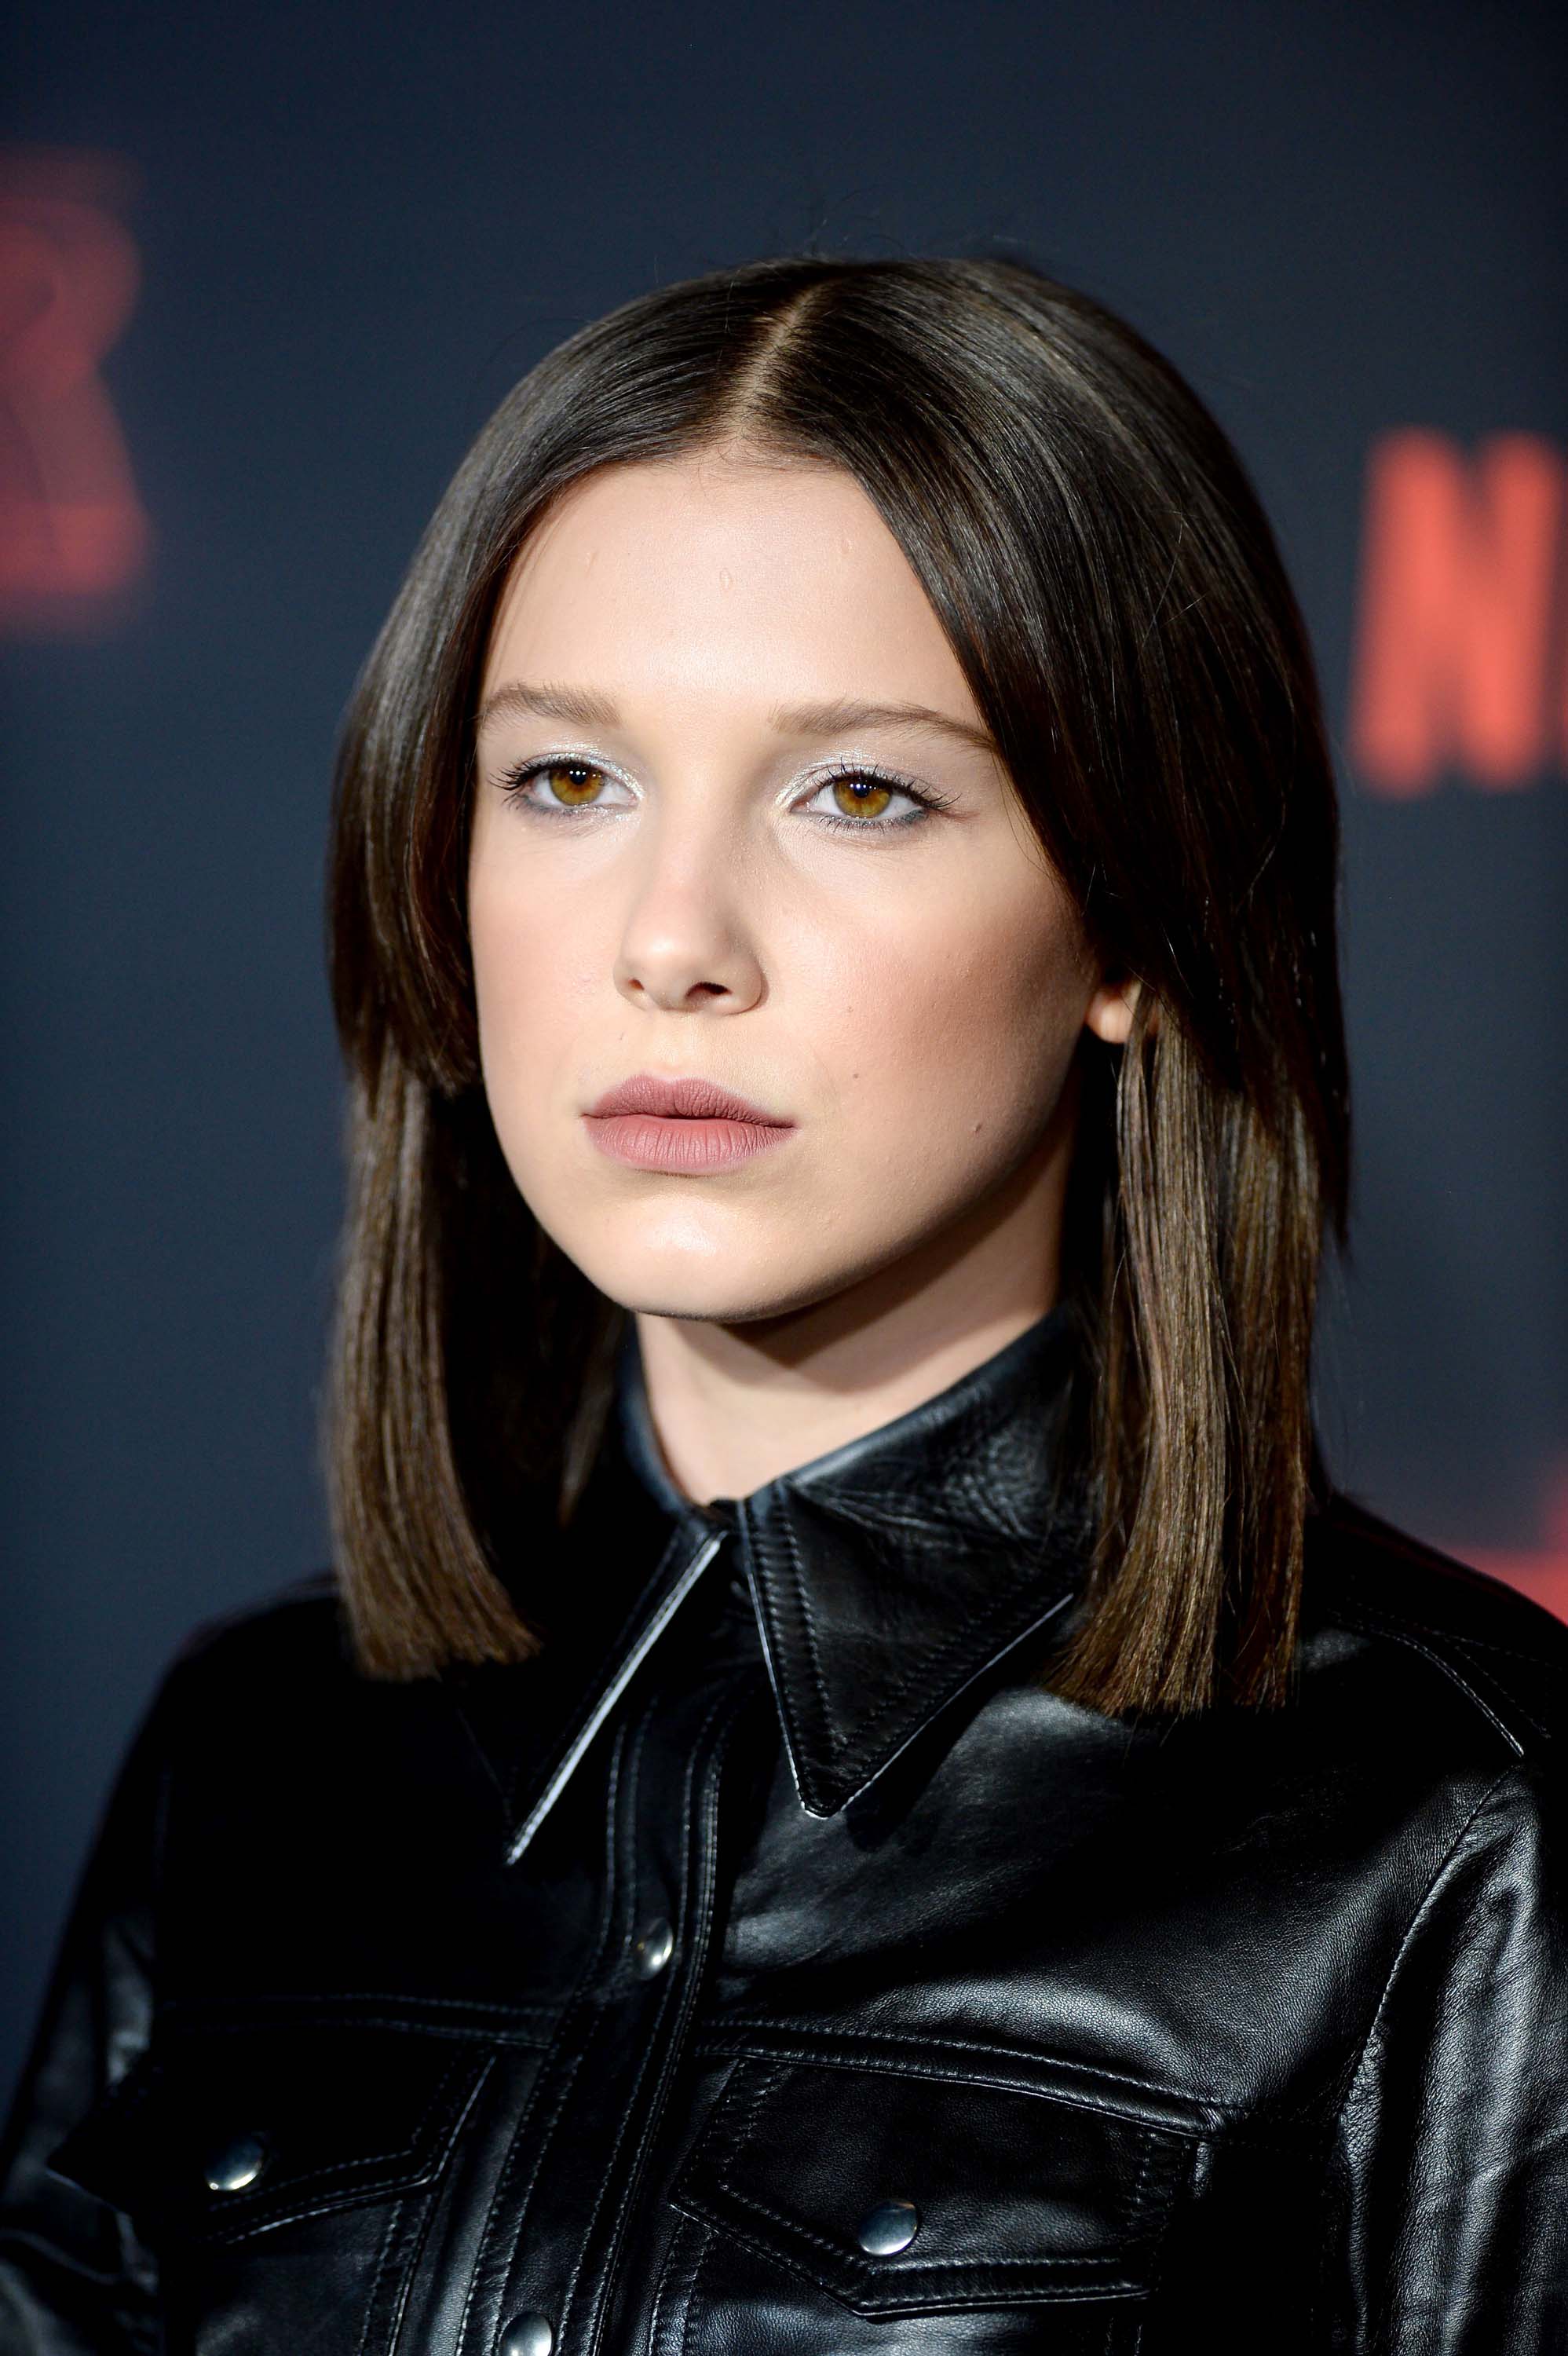 Millie Bobby Brown attends the Stranger Things 2 premiere